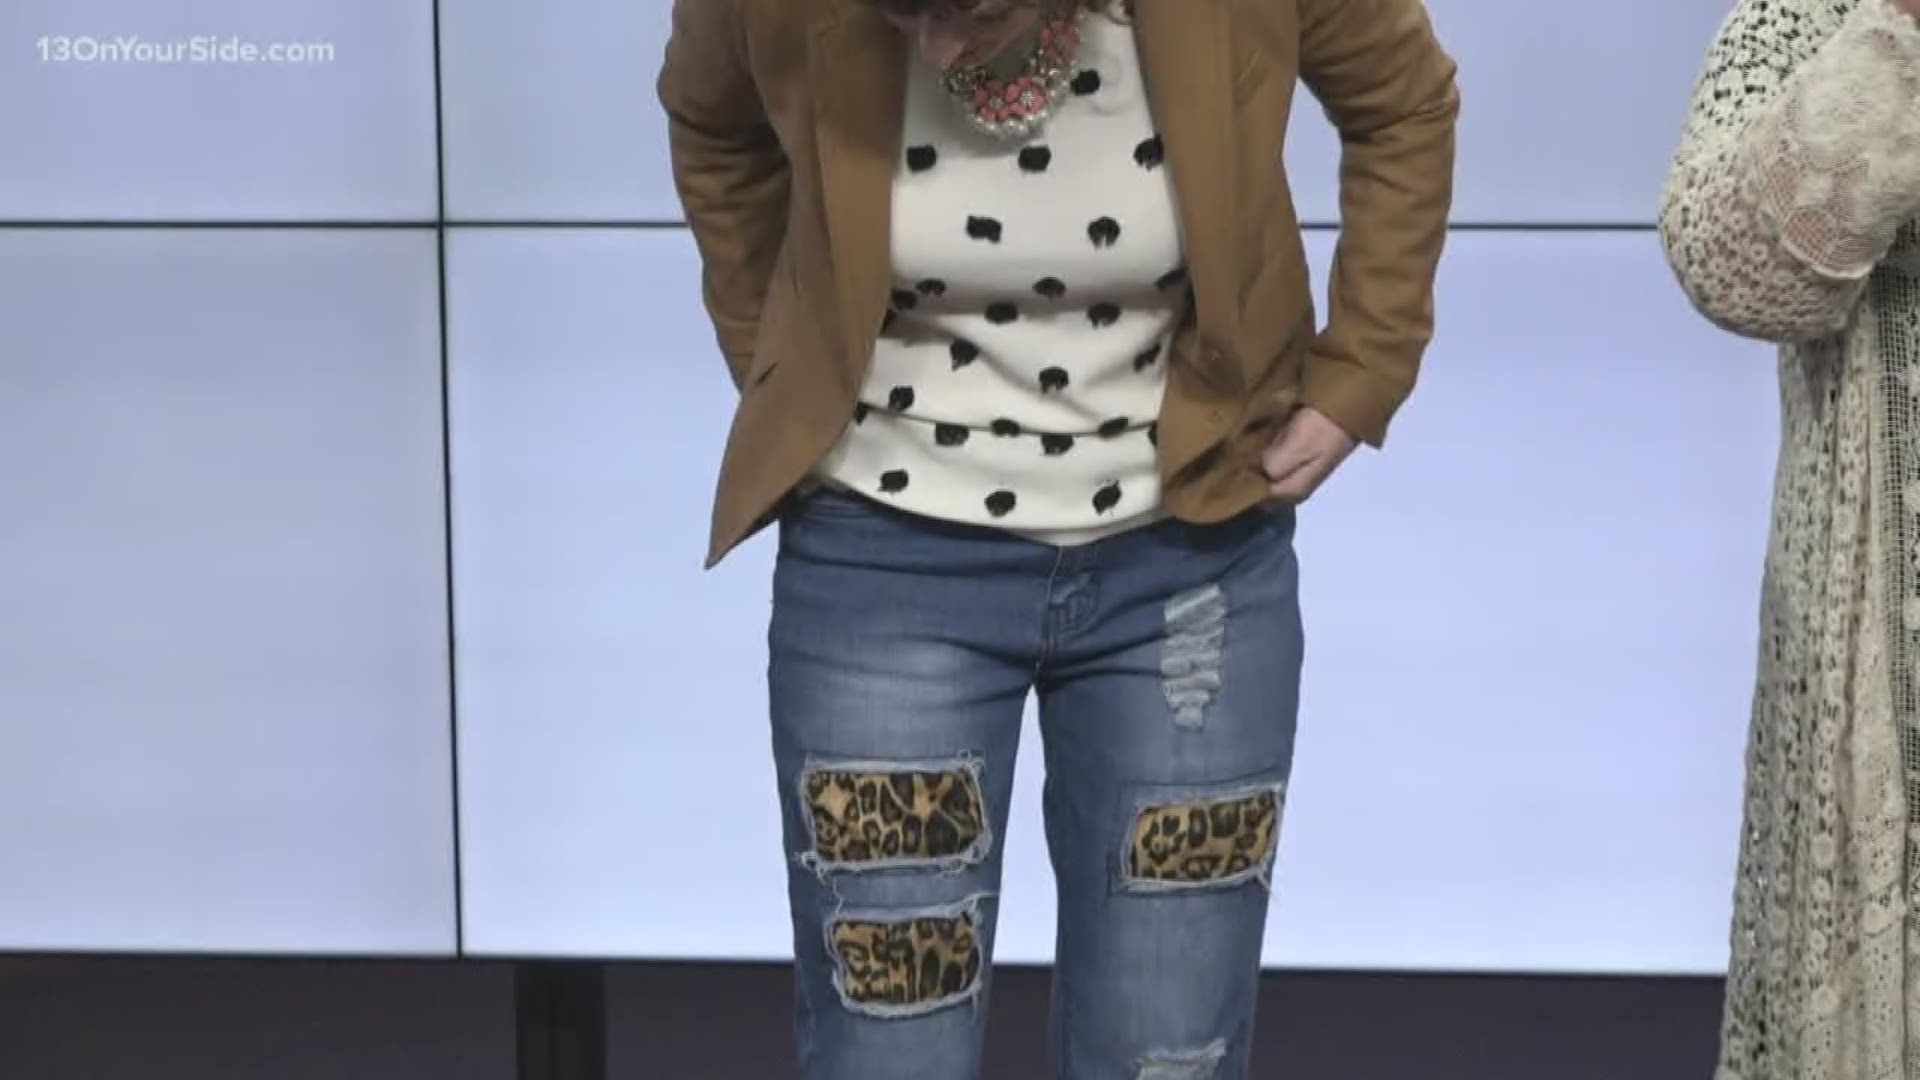 It's the new year, time for some hot fashion trends for the winter. Michelle Krick, a local fashion expert, shred tips on how to style some of the trends.